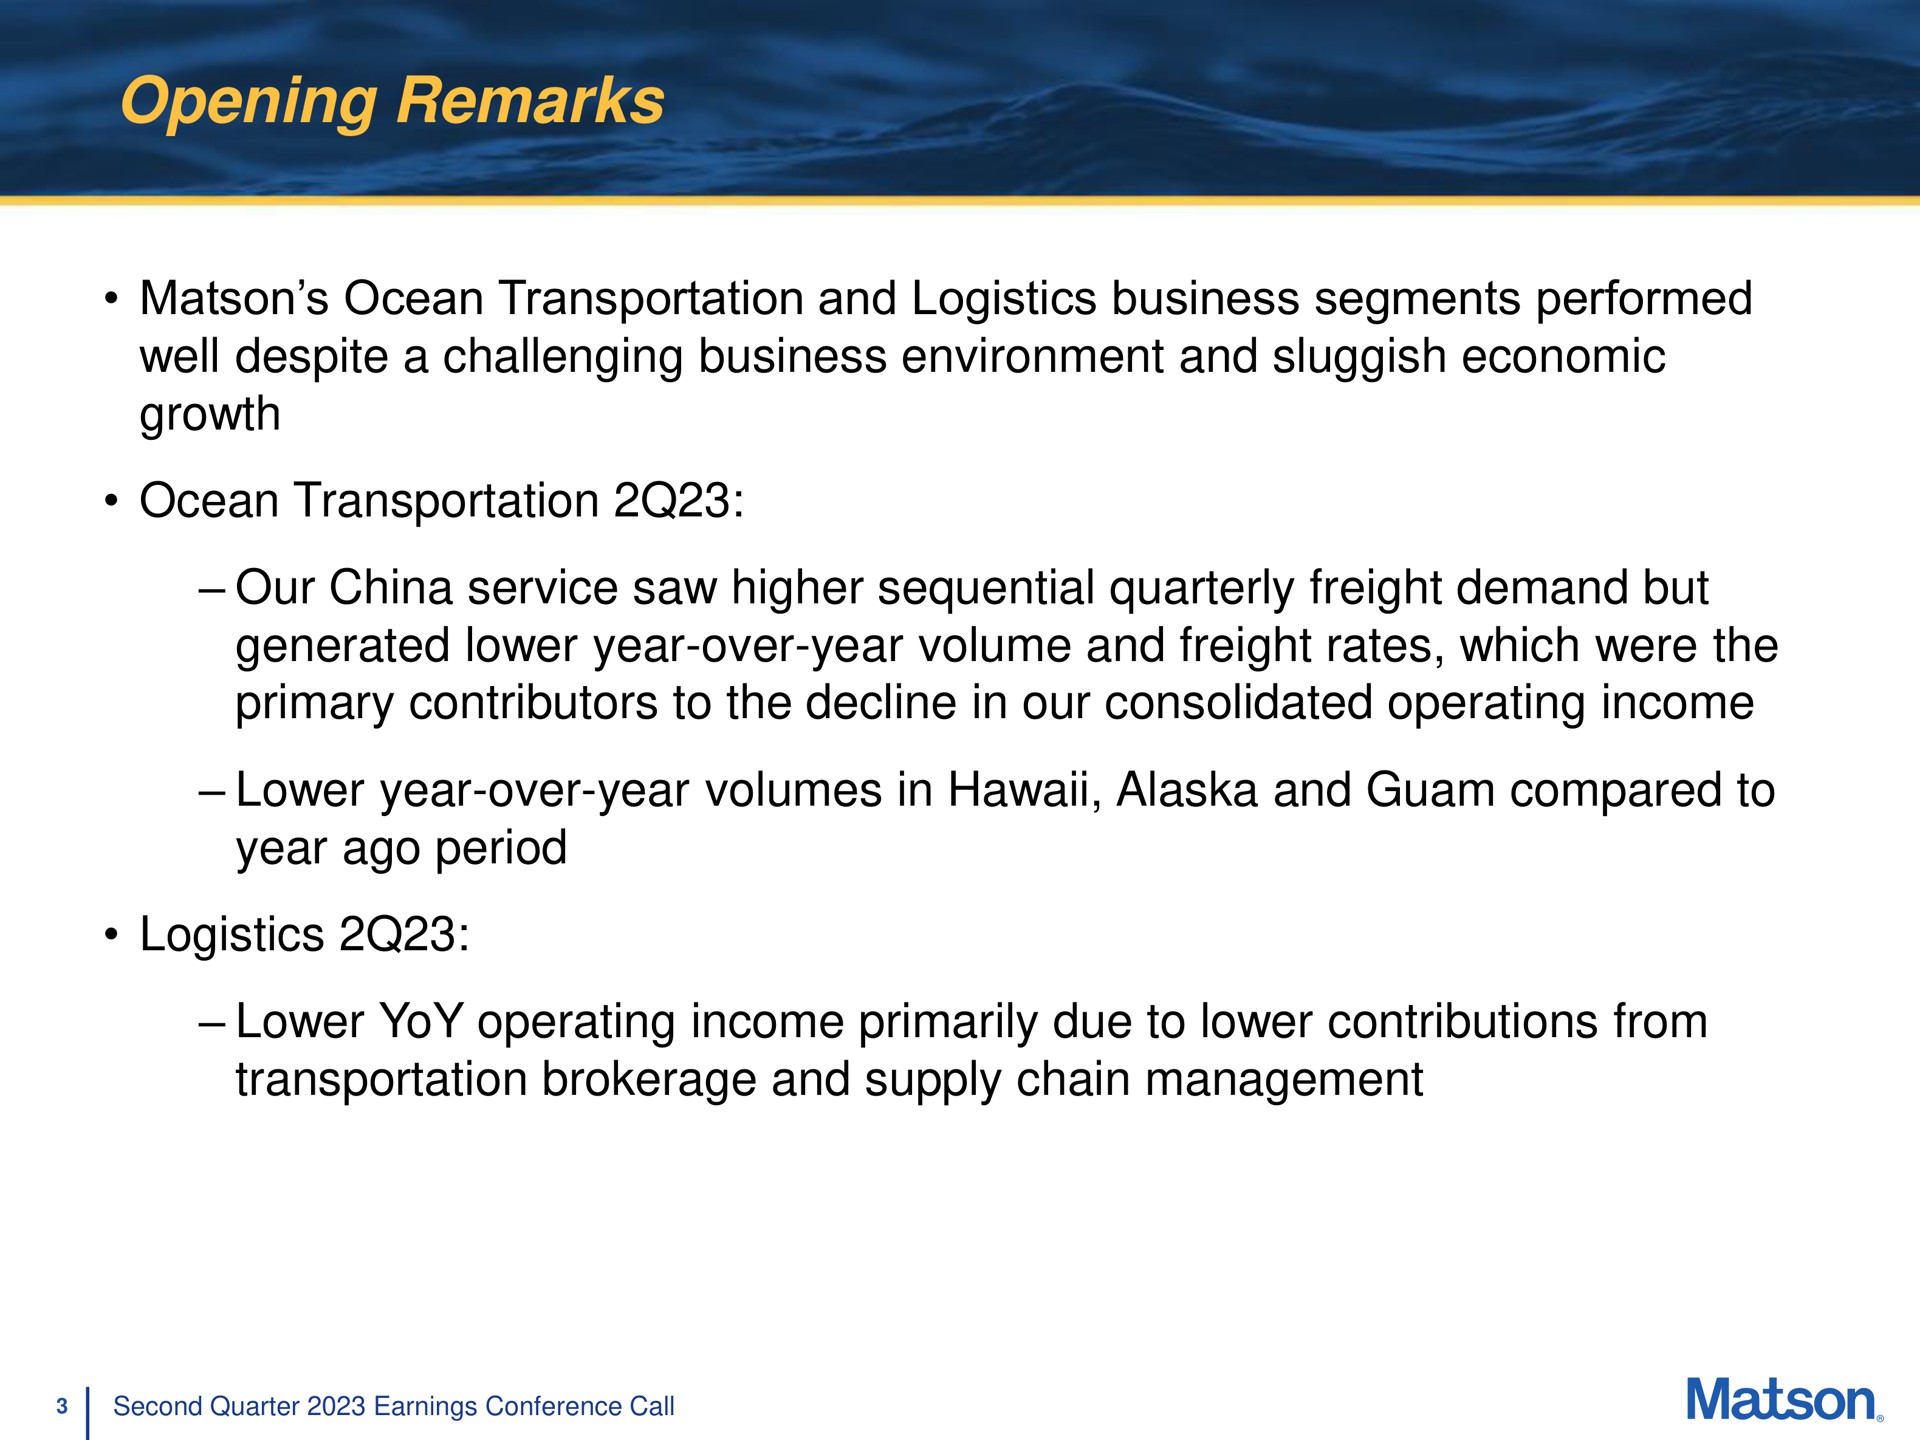 opening remarks ocean transportation and logistics business segments performed well despite a challenging business environment and sluggish economic growth ocean transportation our china service saw higher sequential quarterly freight demand but generated lower year over year volume and freight rates which were the primary contributors to the decline in our consolidated operating income lower year over year volumes in and compared to year ago period logistics lower yoy operating income primarily due to lower contributions from transportation brokerage and supply chain management | Matson